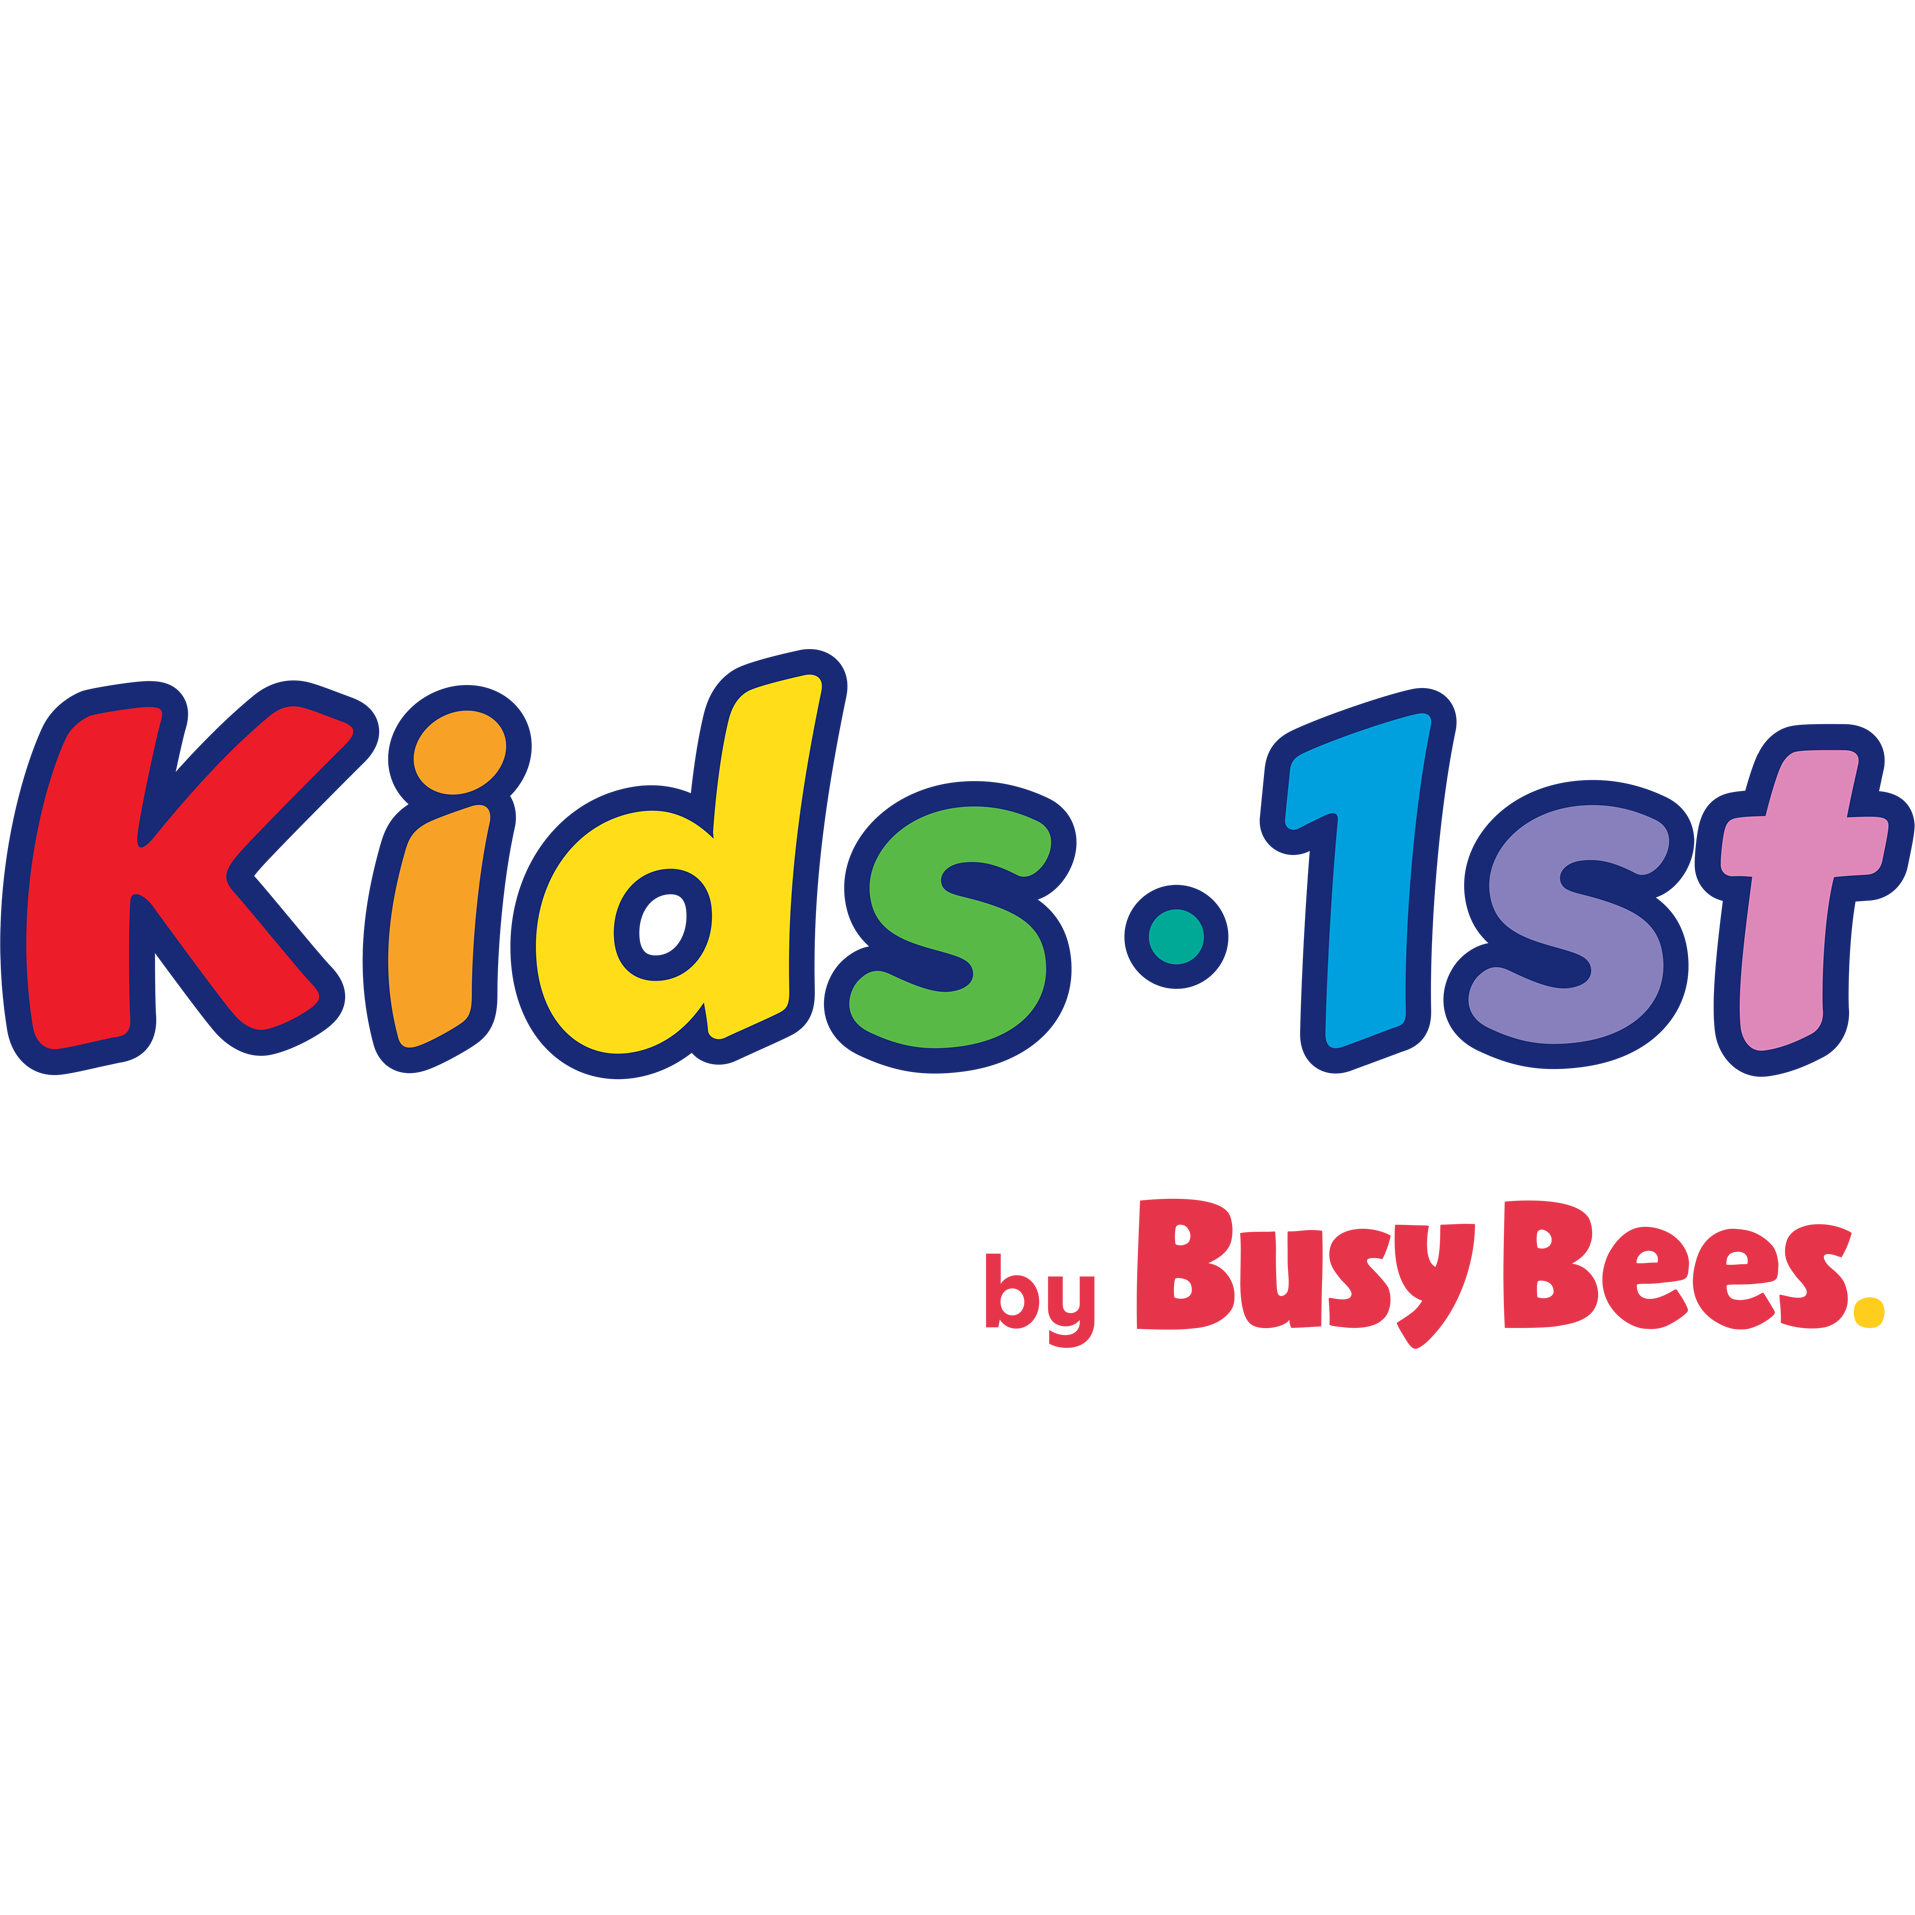 Kids 1st - Great Park - Newcastle upon Tyne, Tyne and Wear NE13 9BD - 01912 365989 | ShowMeLocal.com